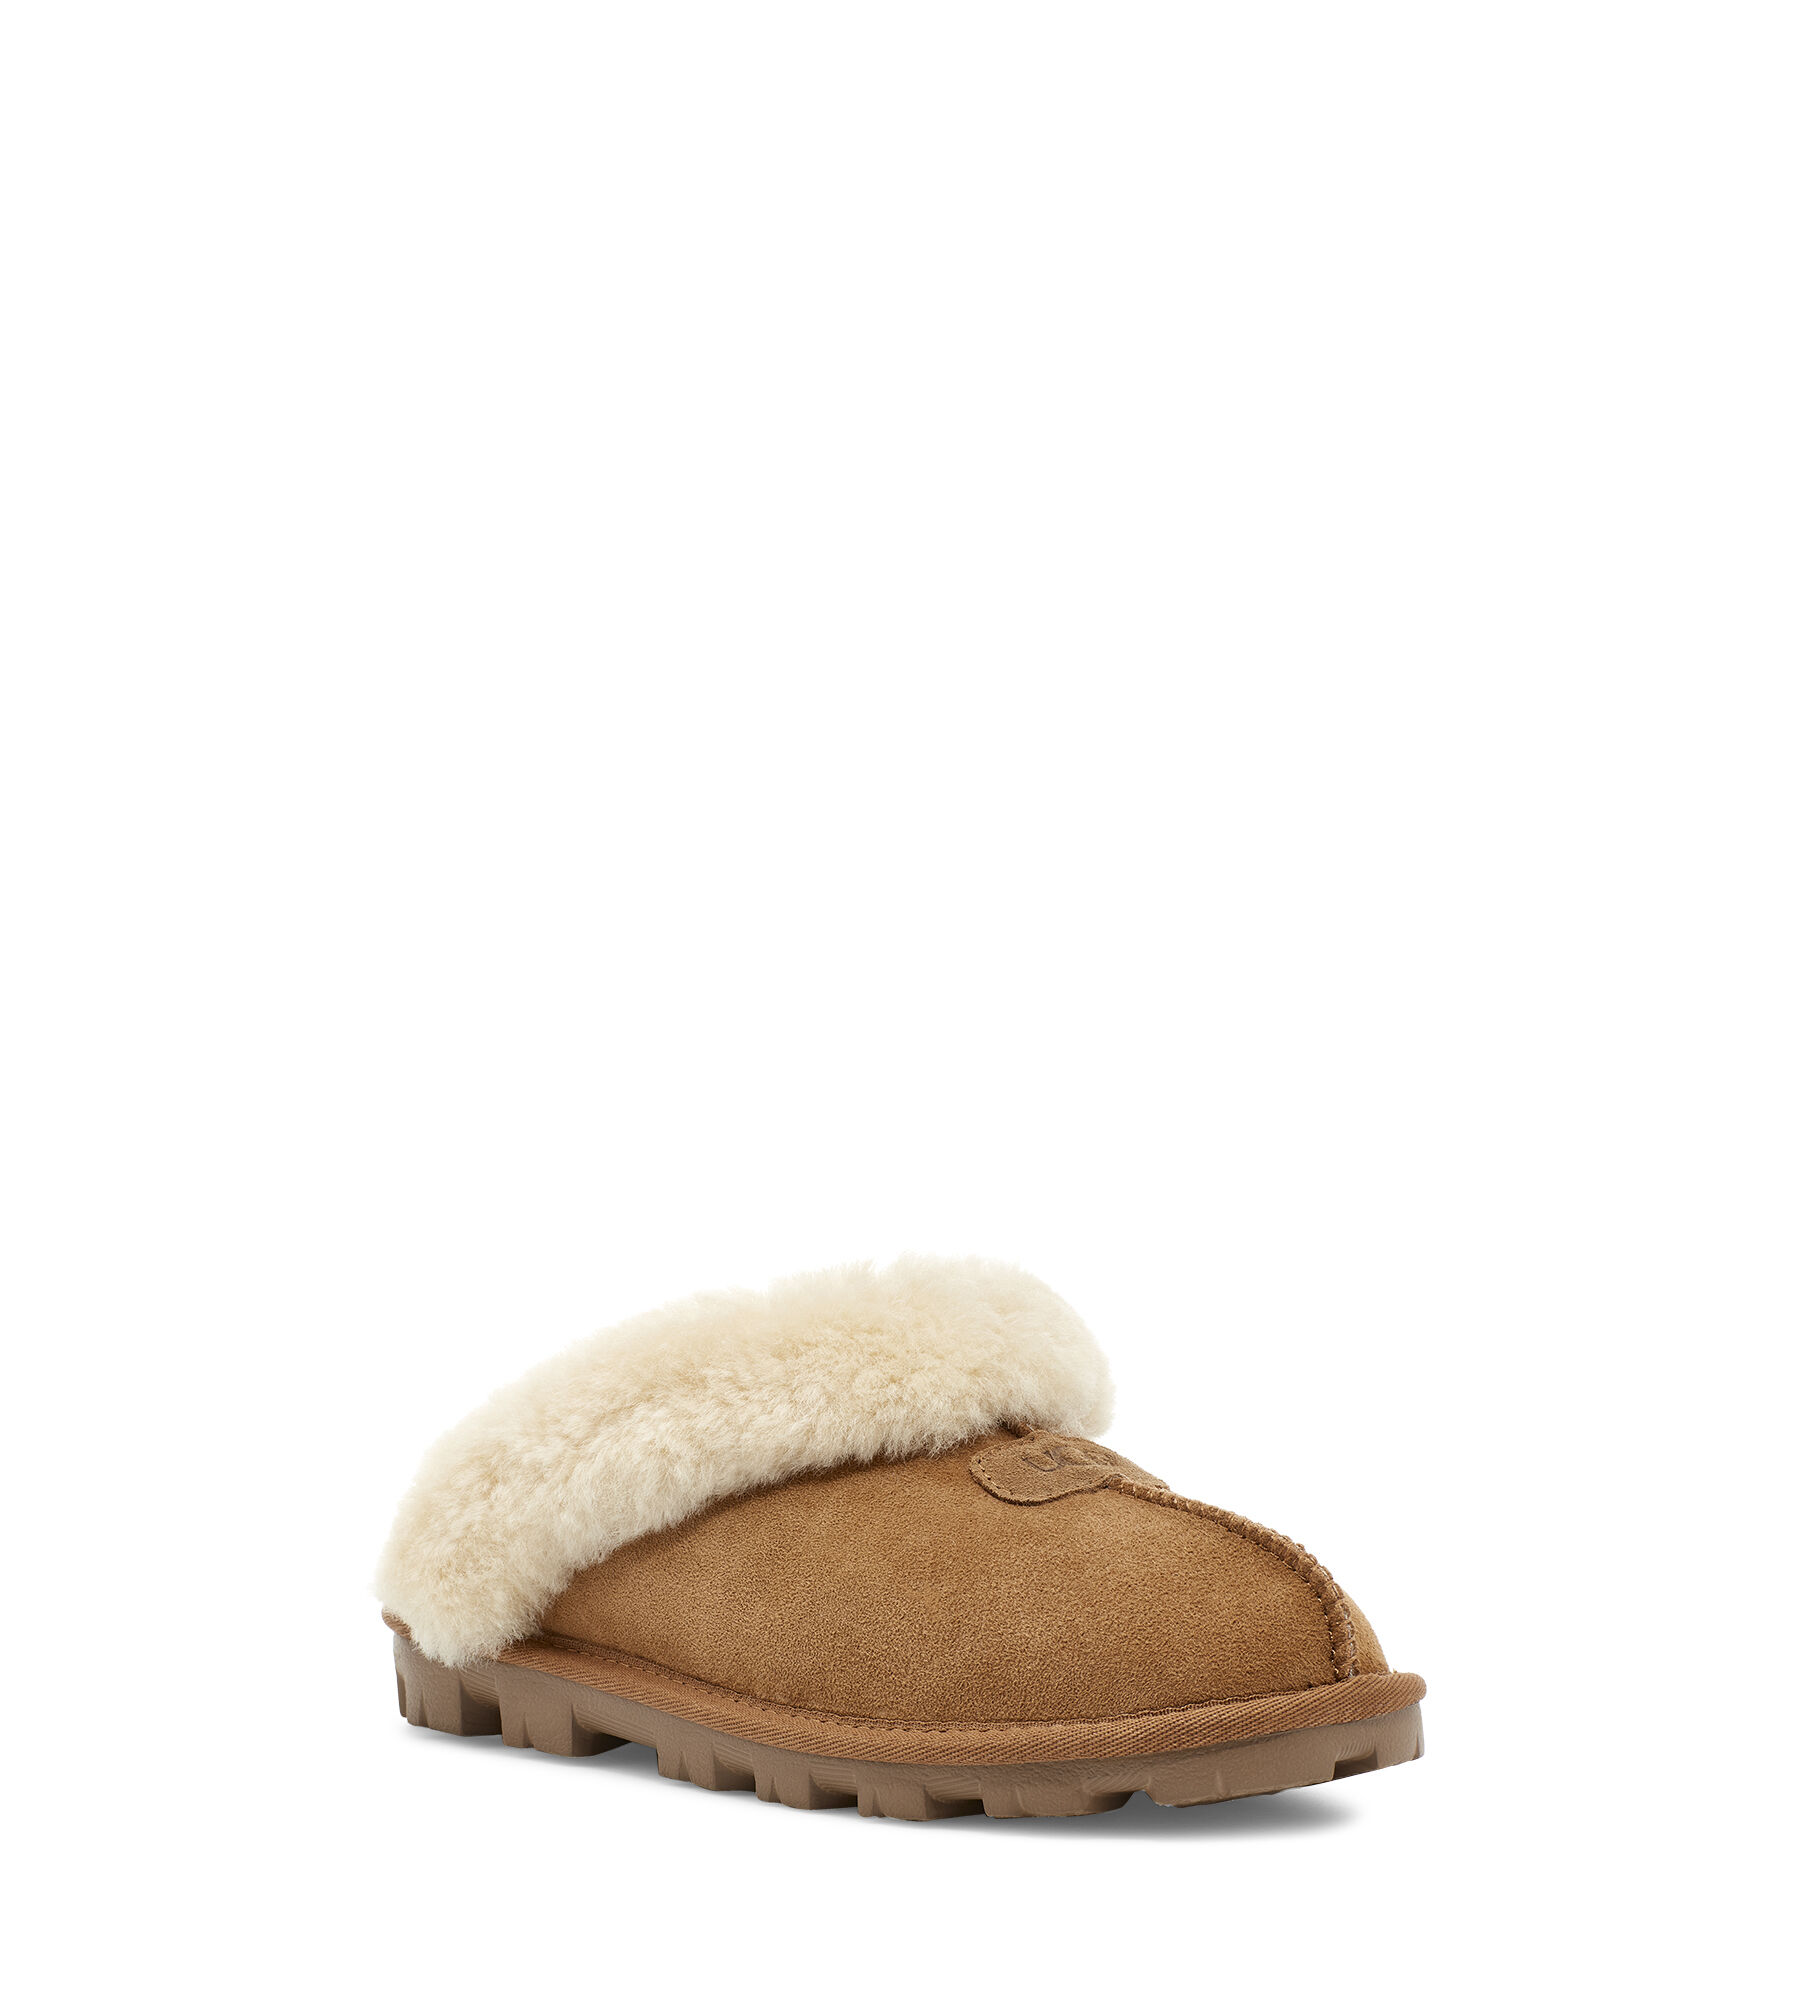 brown ugg slippers